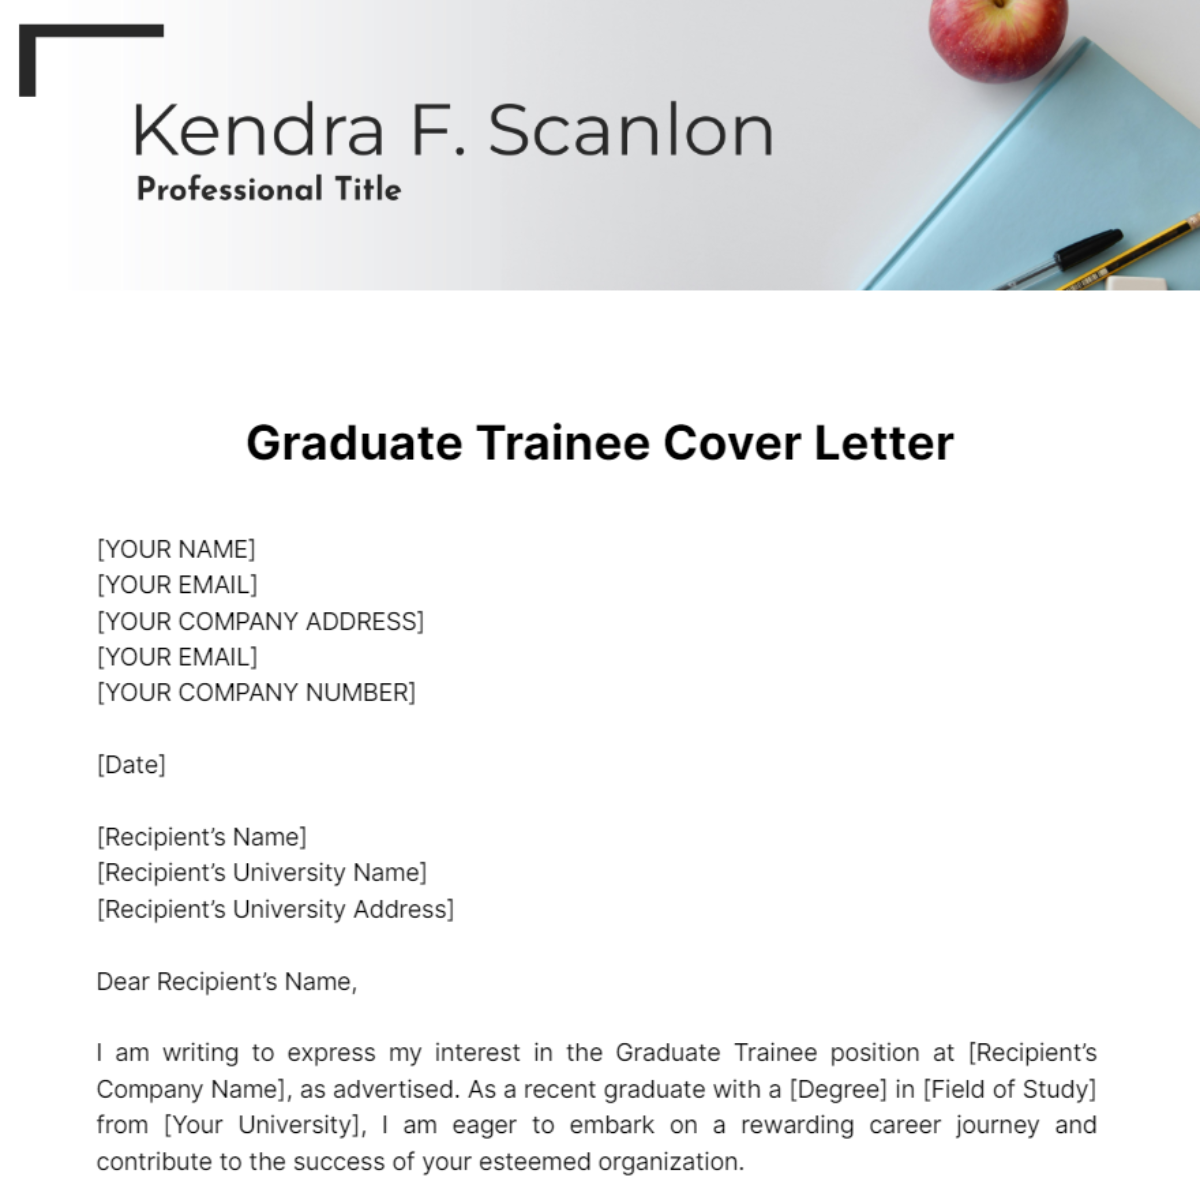 Graduate Trainee Cover Letter  Template